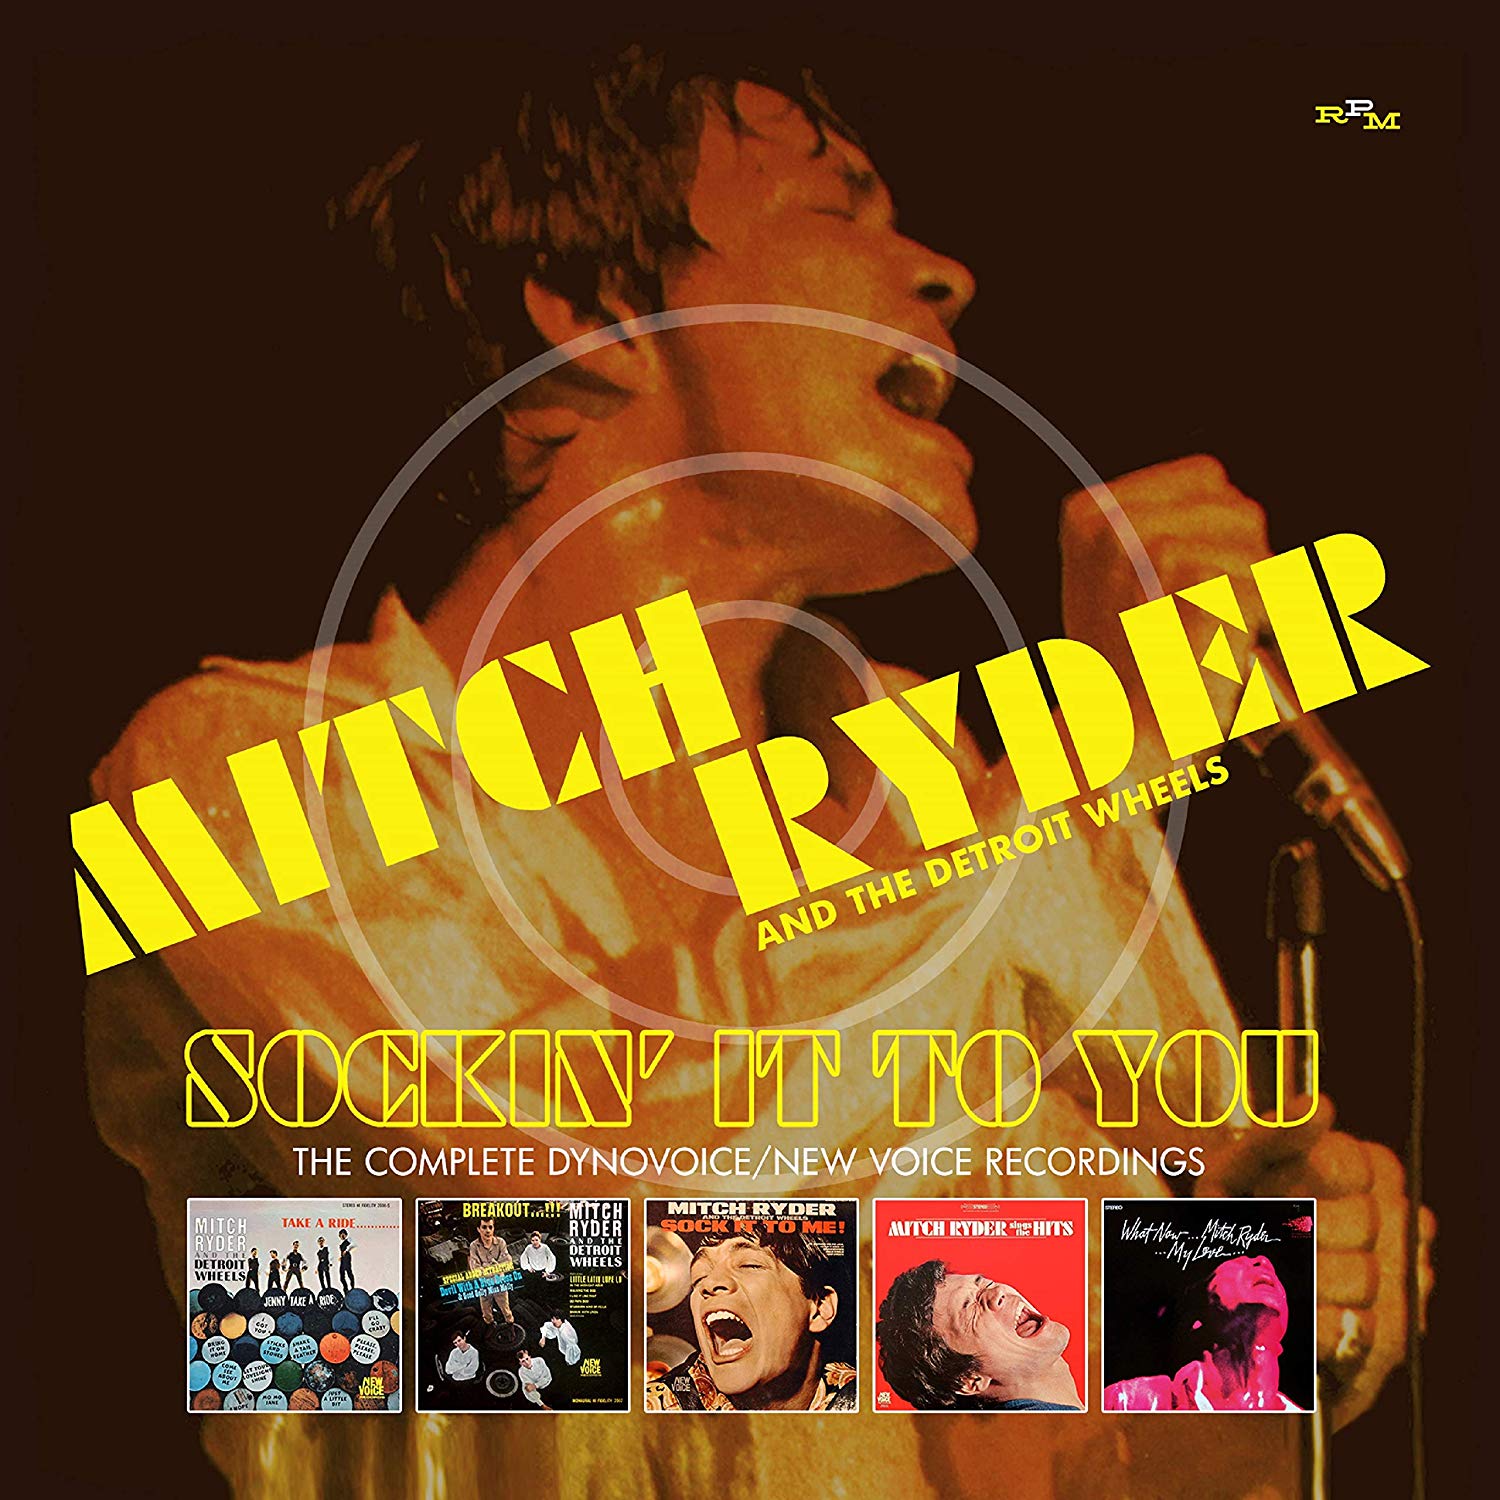 MITCH RYDER & THE DETROIT WHEELS / ミッチ・ライダー・アンド・デトロイト・ホイールズ / SOCKIN' IT TO YOU: THE COMPLETE DYNOVOICE / NEW VOICE RECORDINGS / 地獄の叫び~コンプリート・ボブ・クルー・プロダンションズ